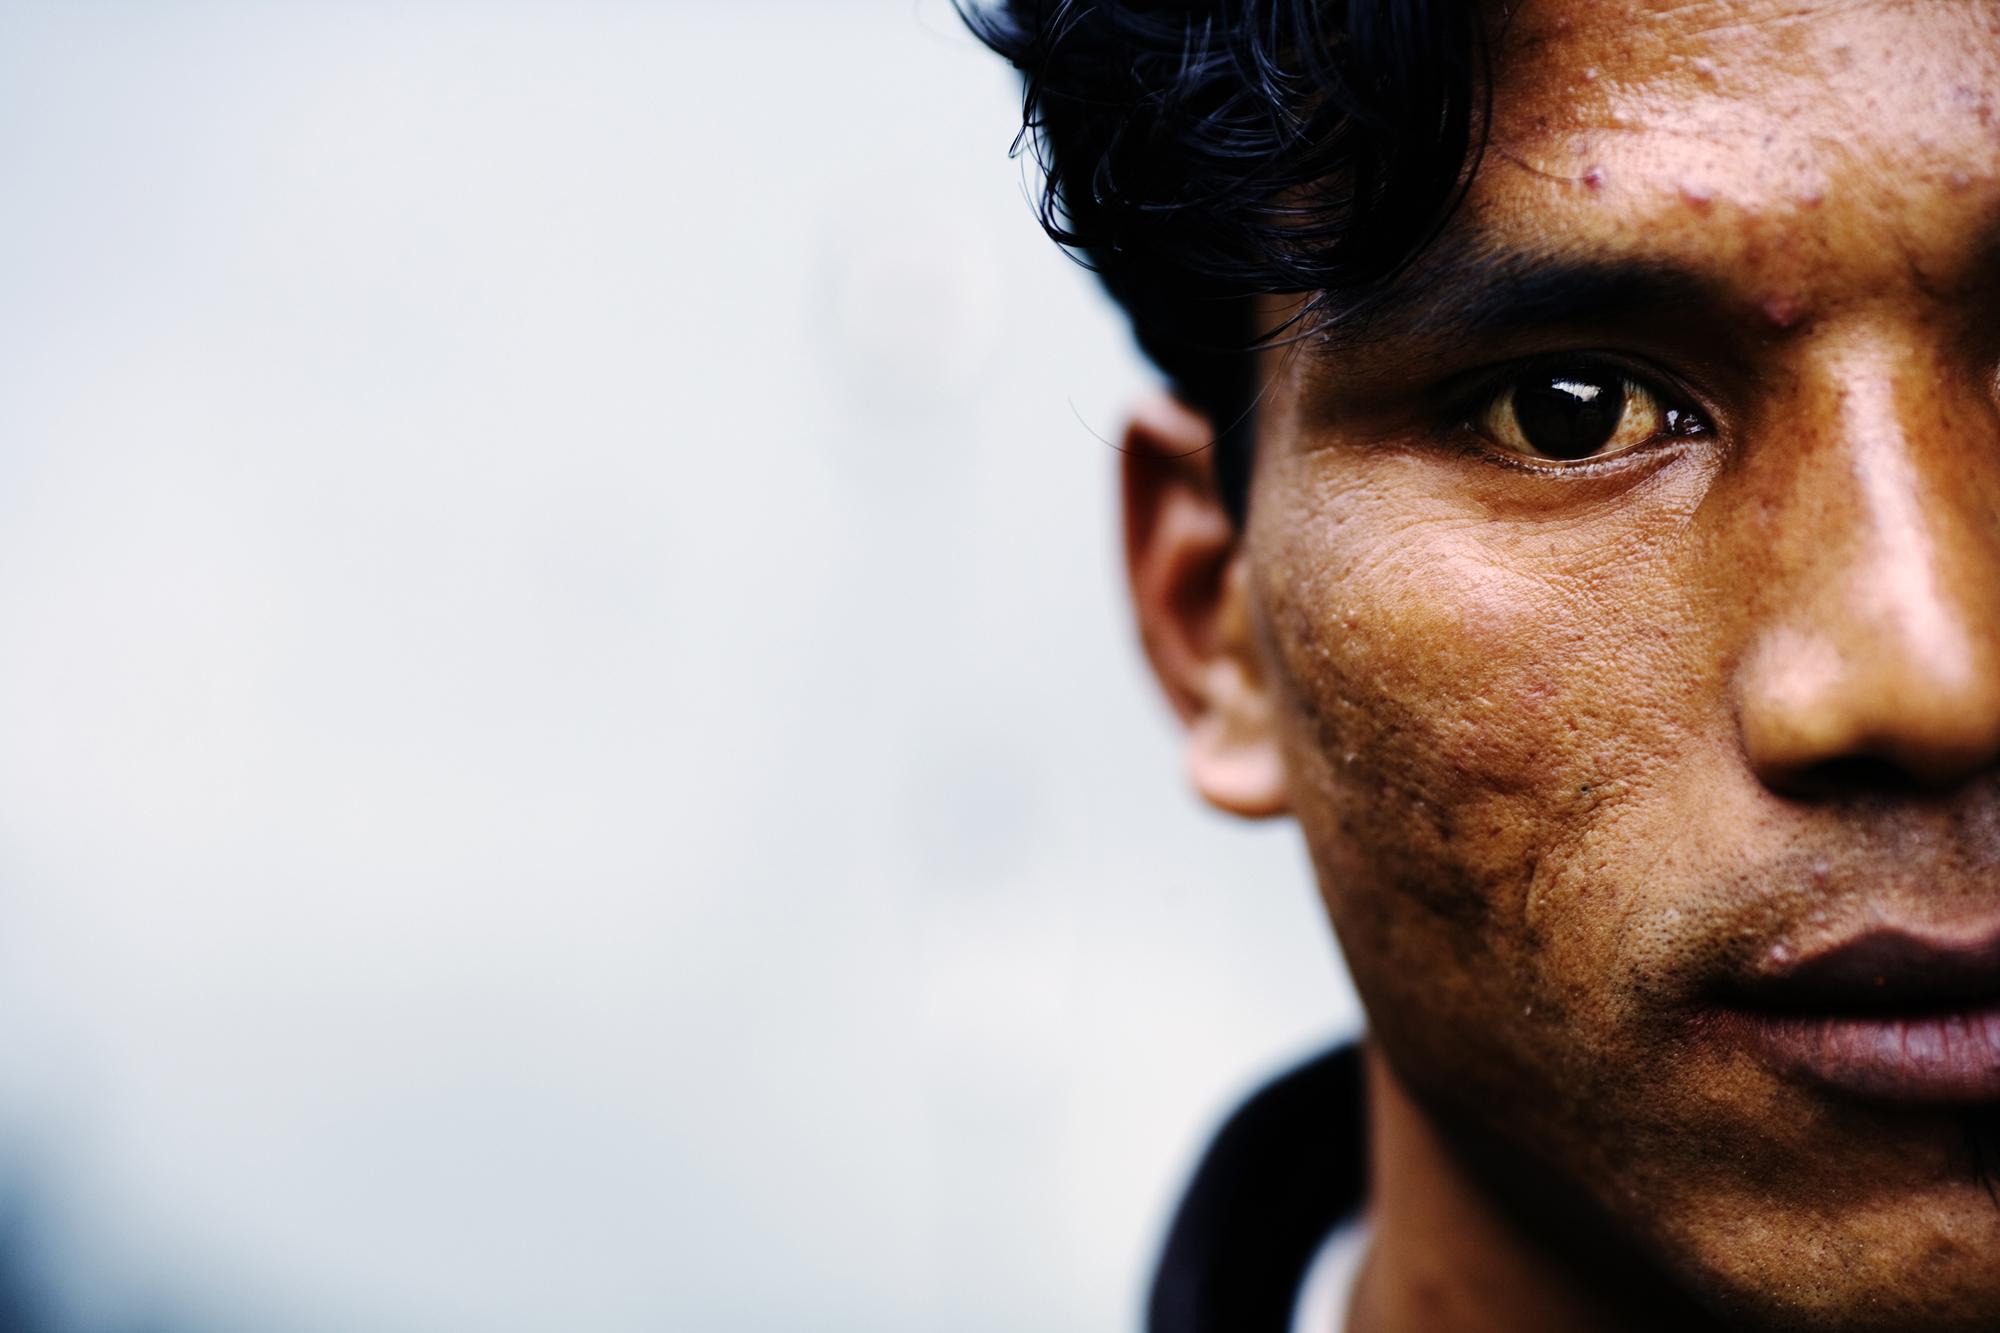 Injecting death - INDIA Shillong, Meghalaya A portrait of an inmate at the...